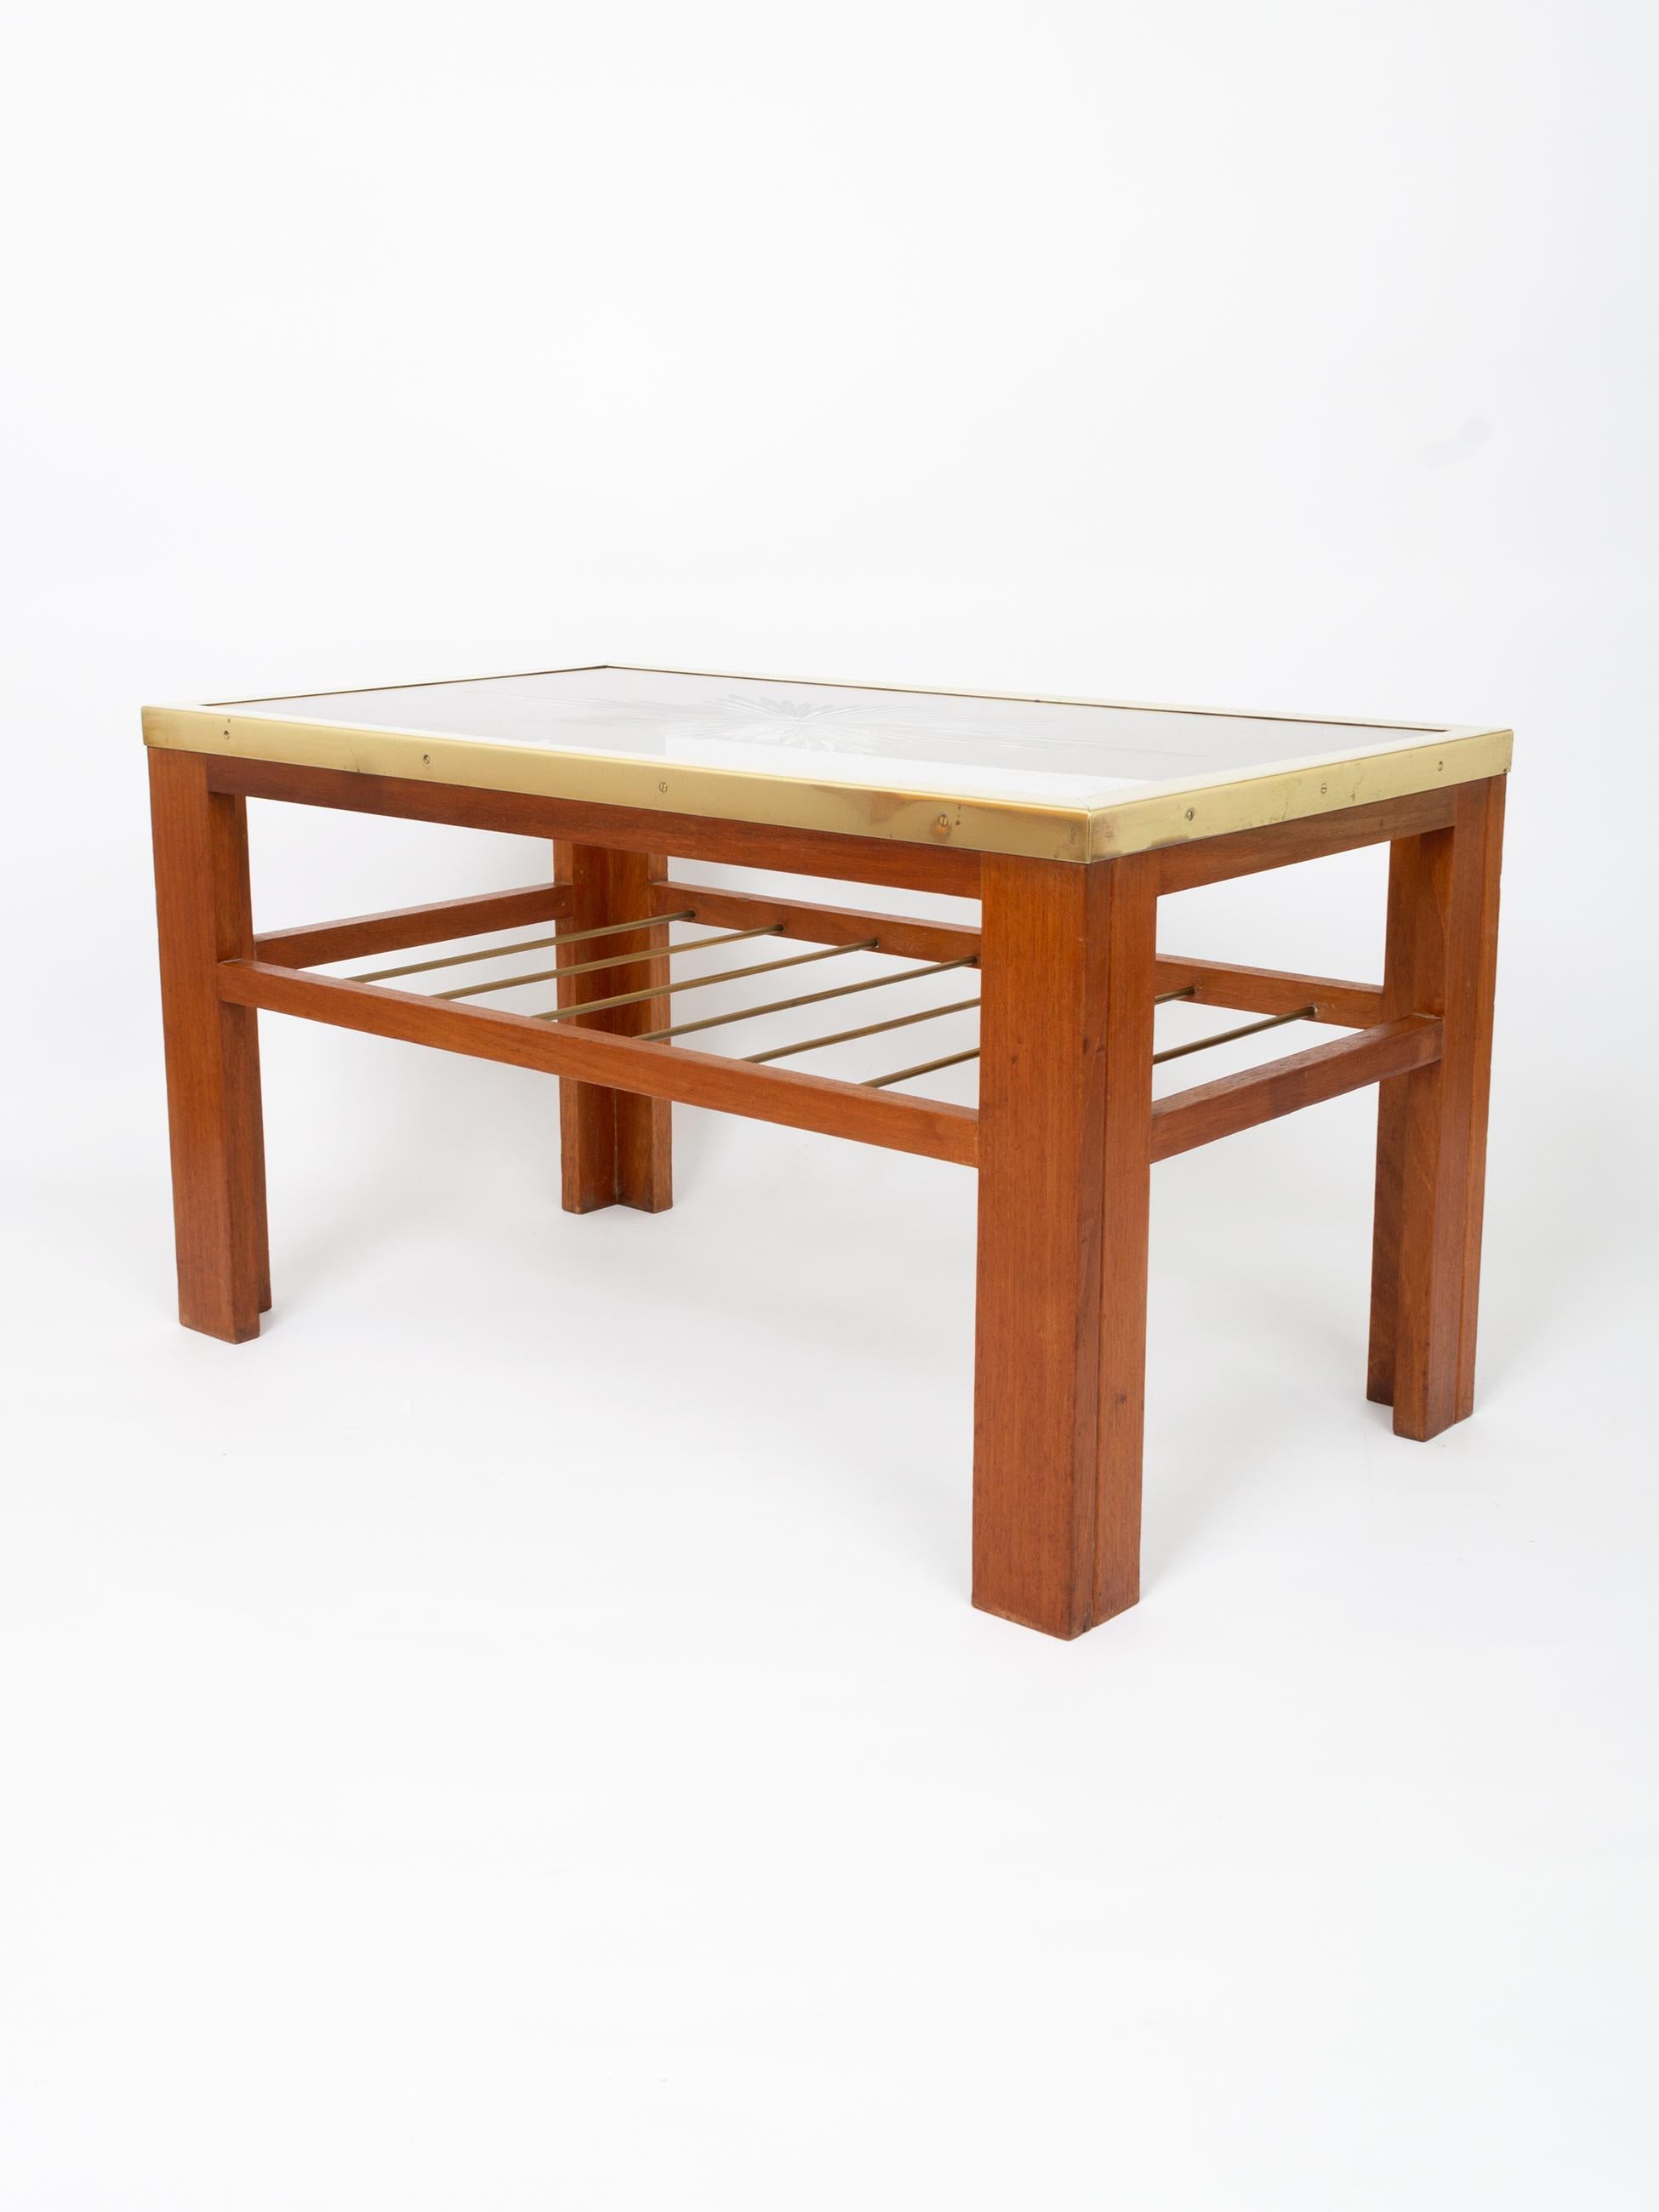 Art Deco etched glass & brass coffee table with mahogany frame, France, C.1940.
In very good original condition. Some patination to the brass trim and light scratching to the glass.